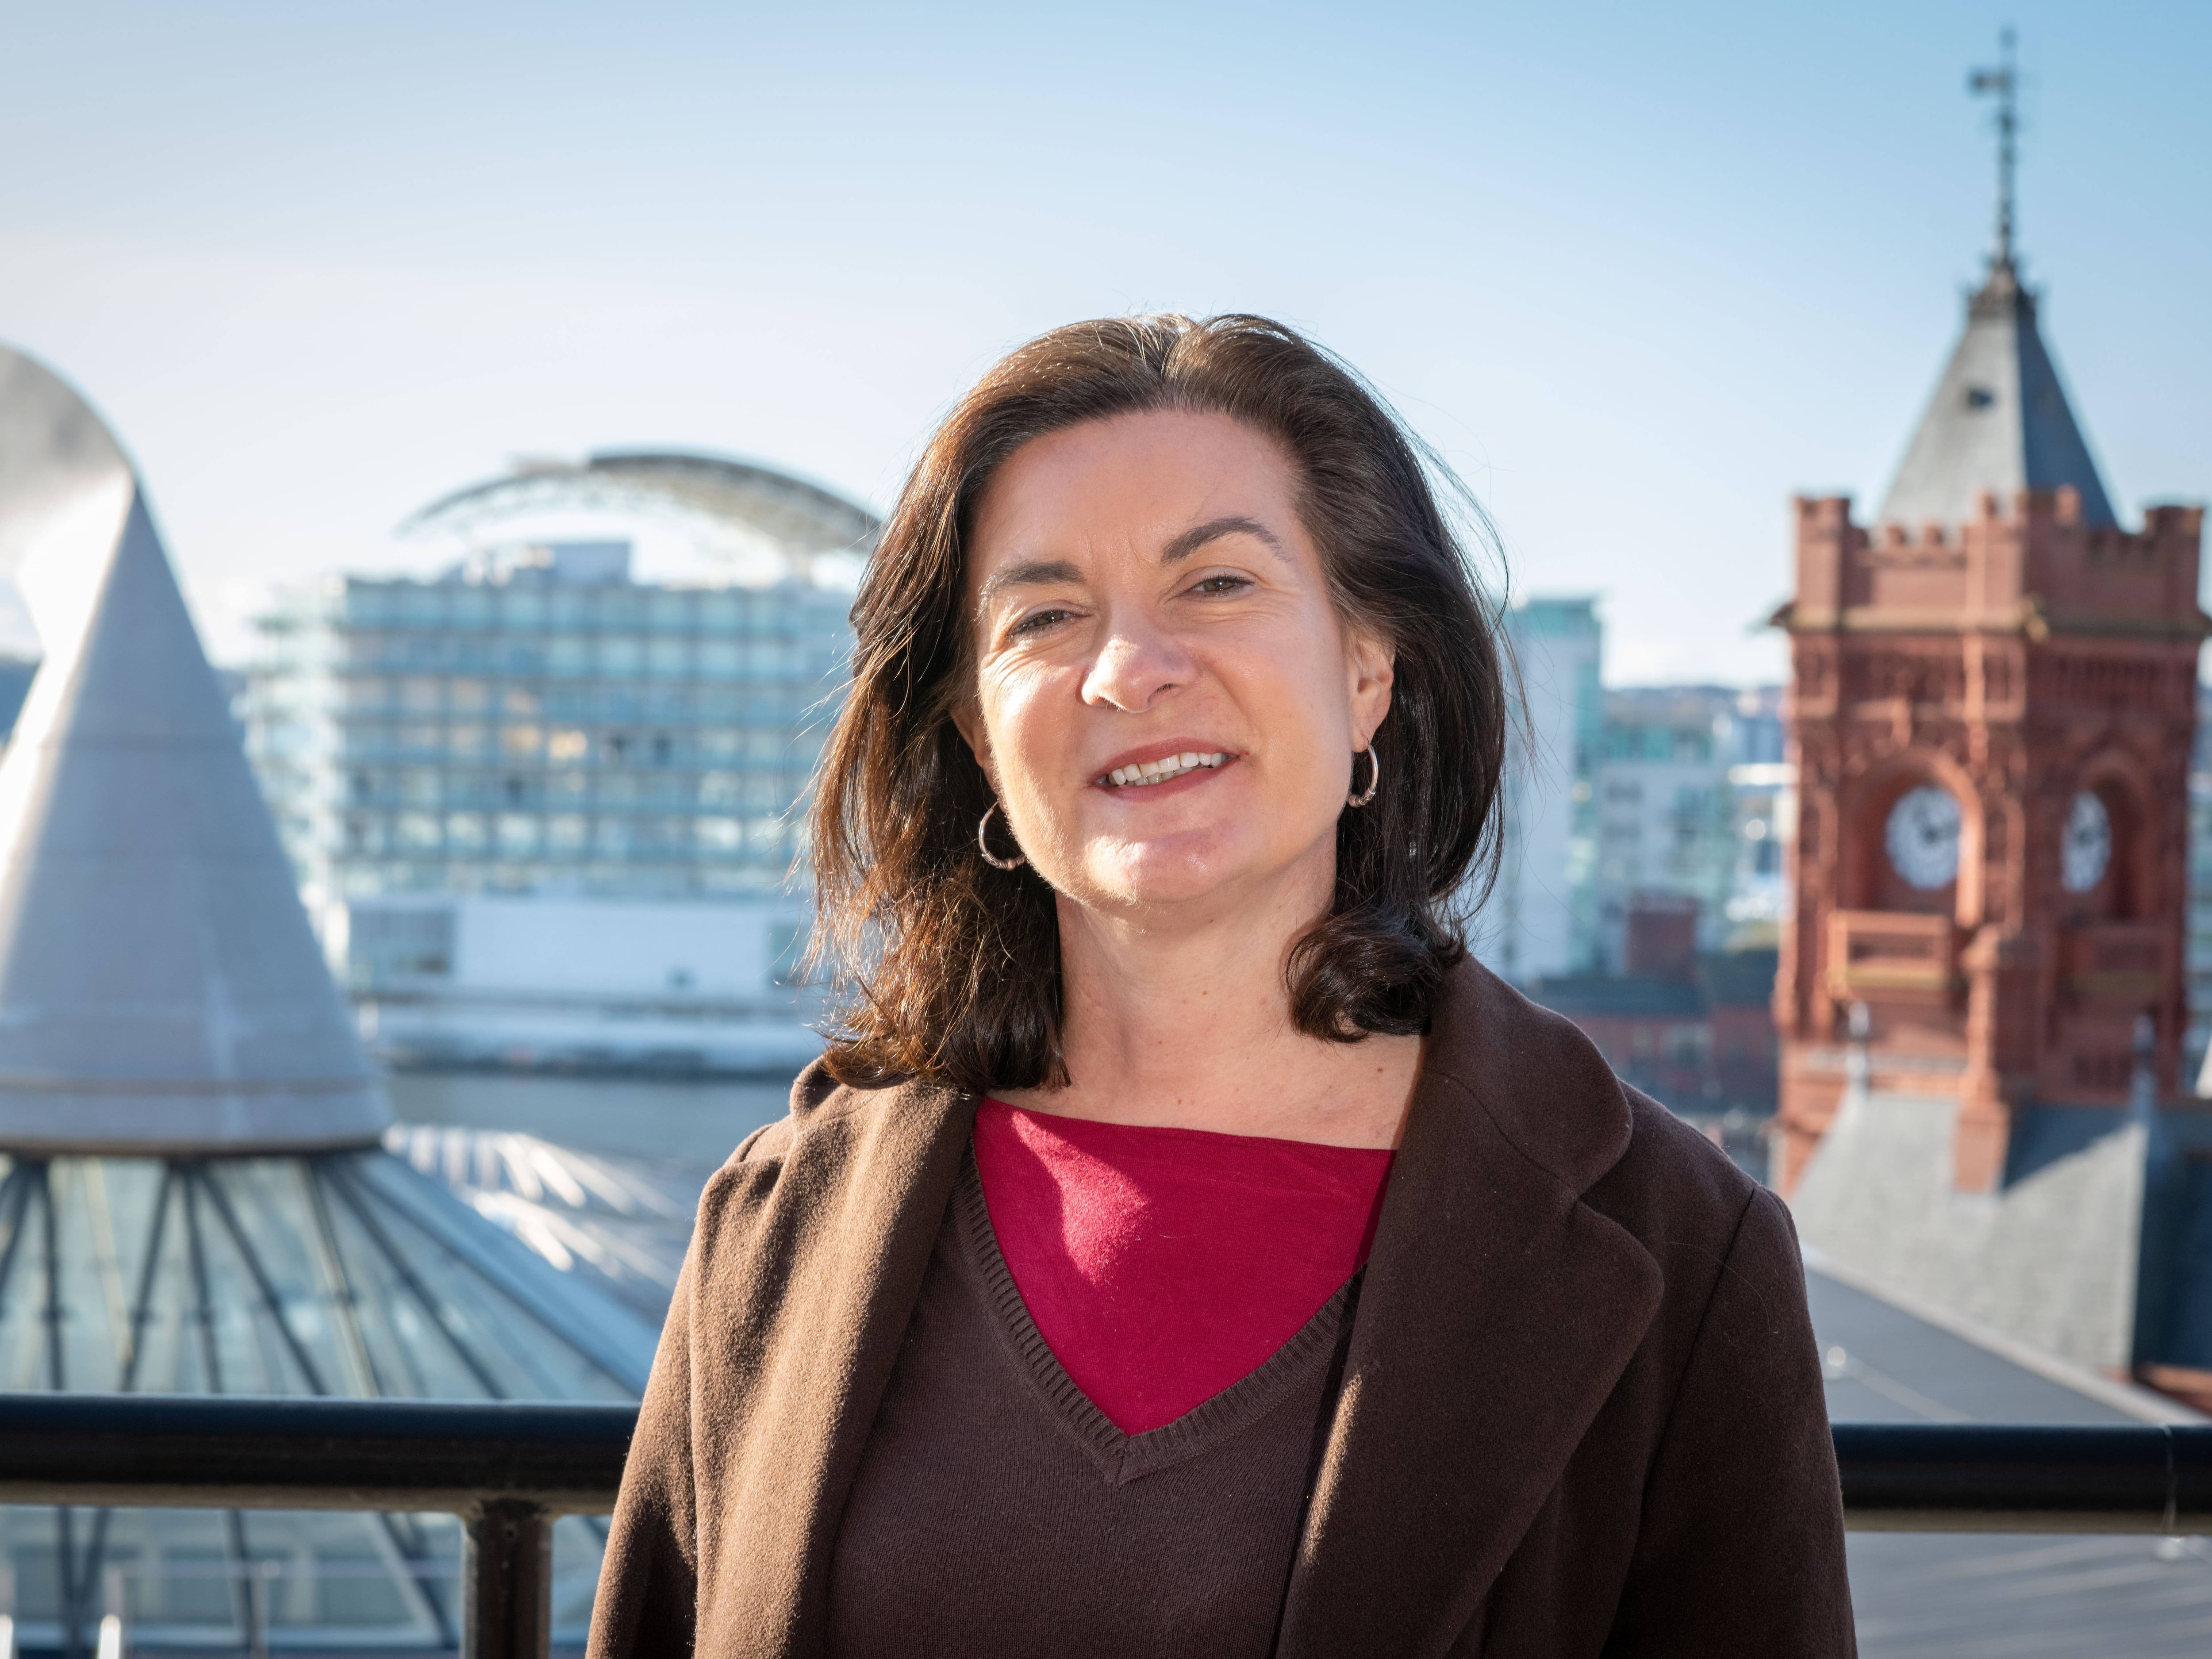 Eluned Morgan likely to become first female FM in Wales